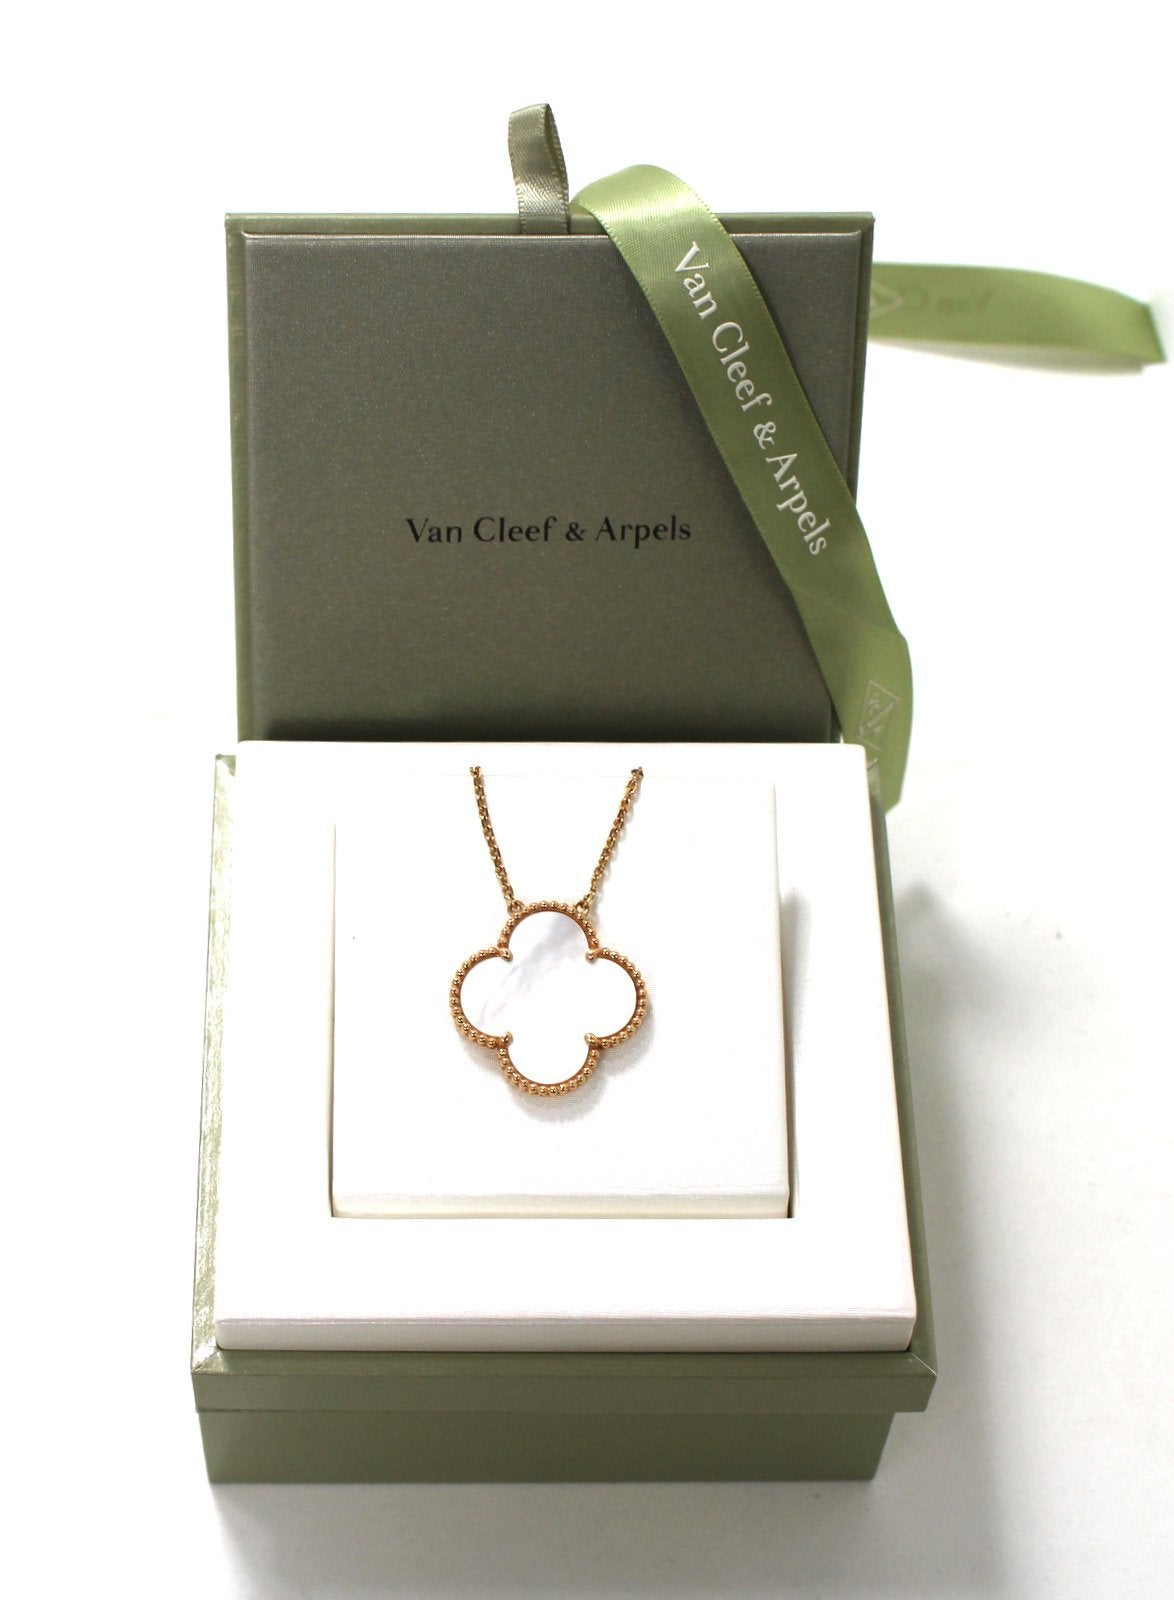 PRISTINE Van Cleef & Arpels Limited Edition Rose Gold Breast Cancer Awareness Alhambra Pendant  
  A white mother of pearl Alhambra pendant, signifying luck and health, is edged in “pink” rose gold.   Sixteen inch chain which can easily be extended